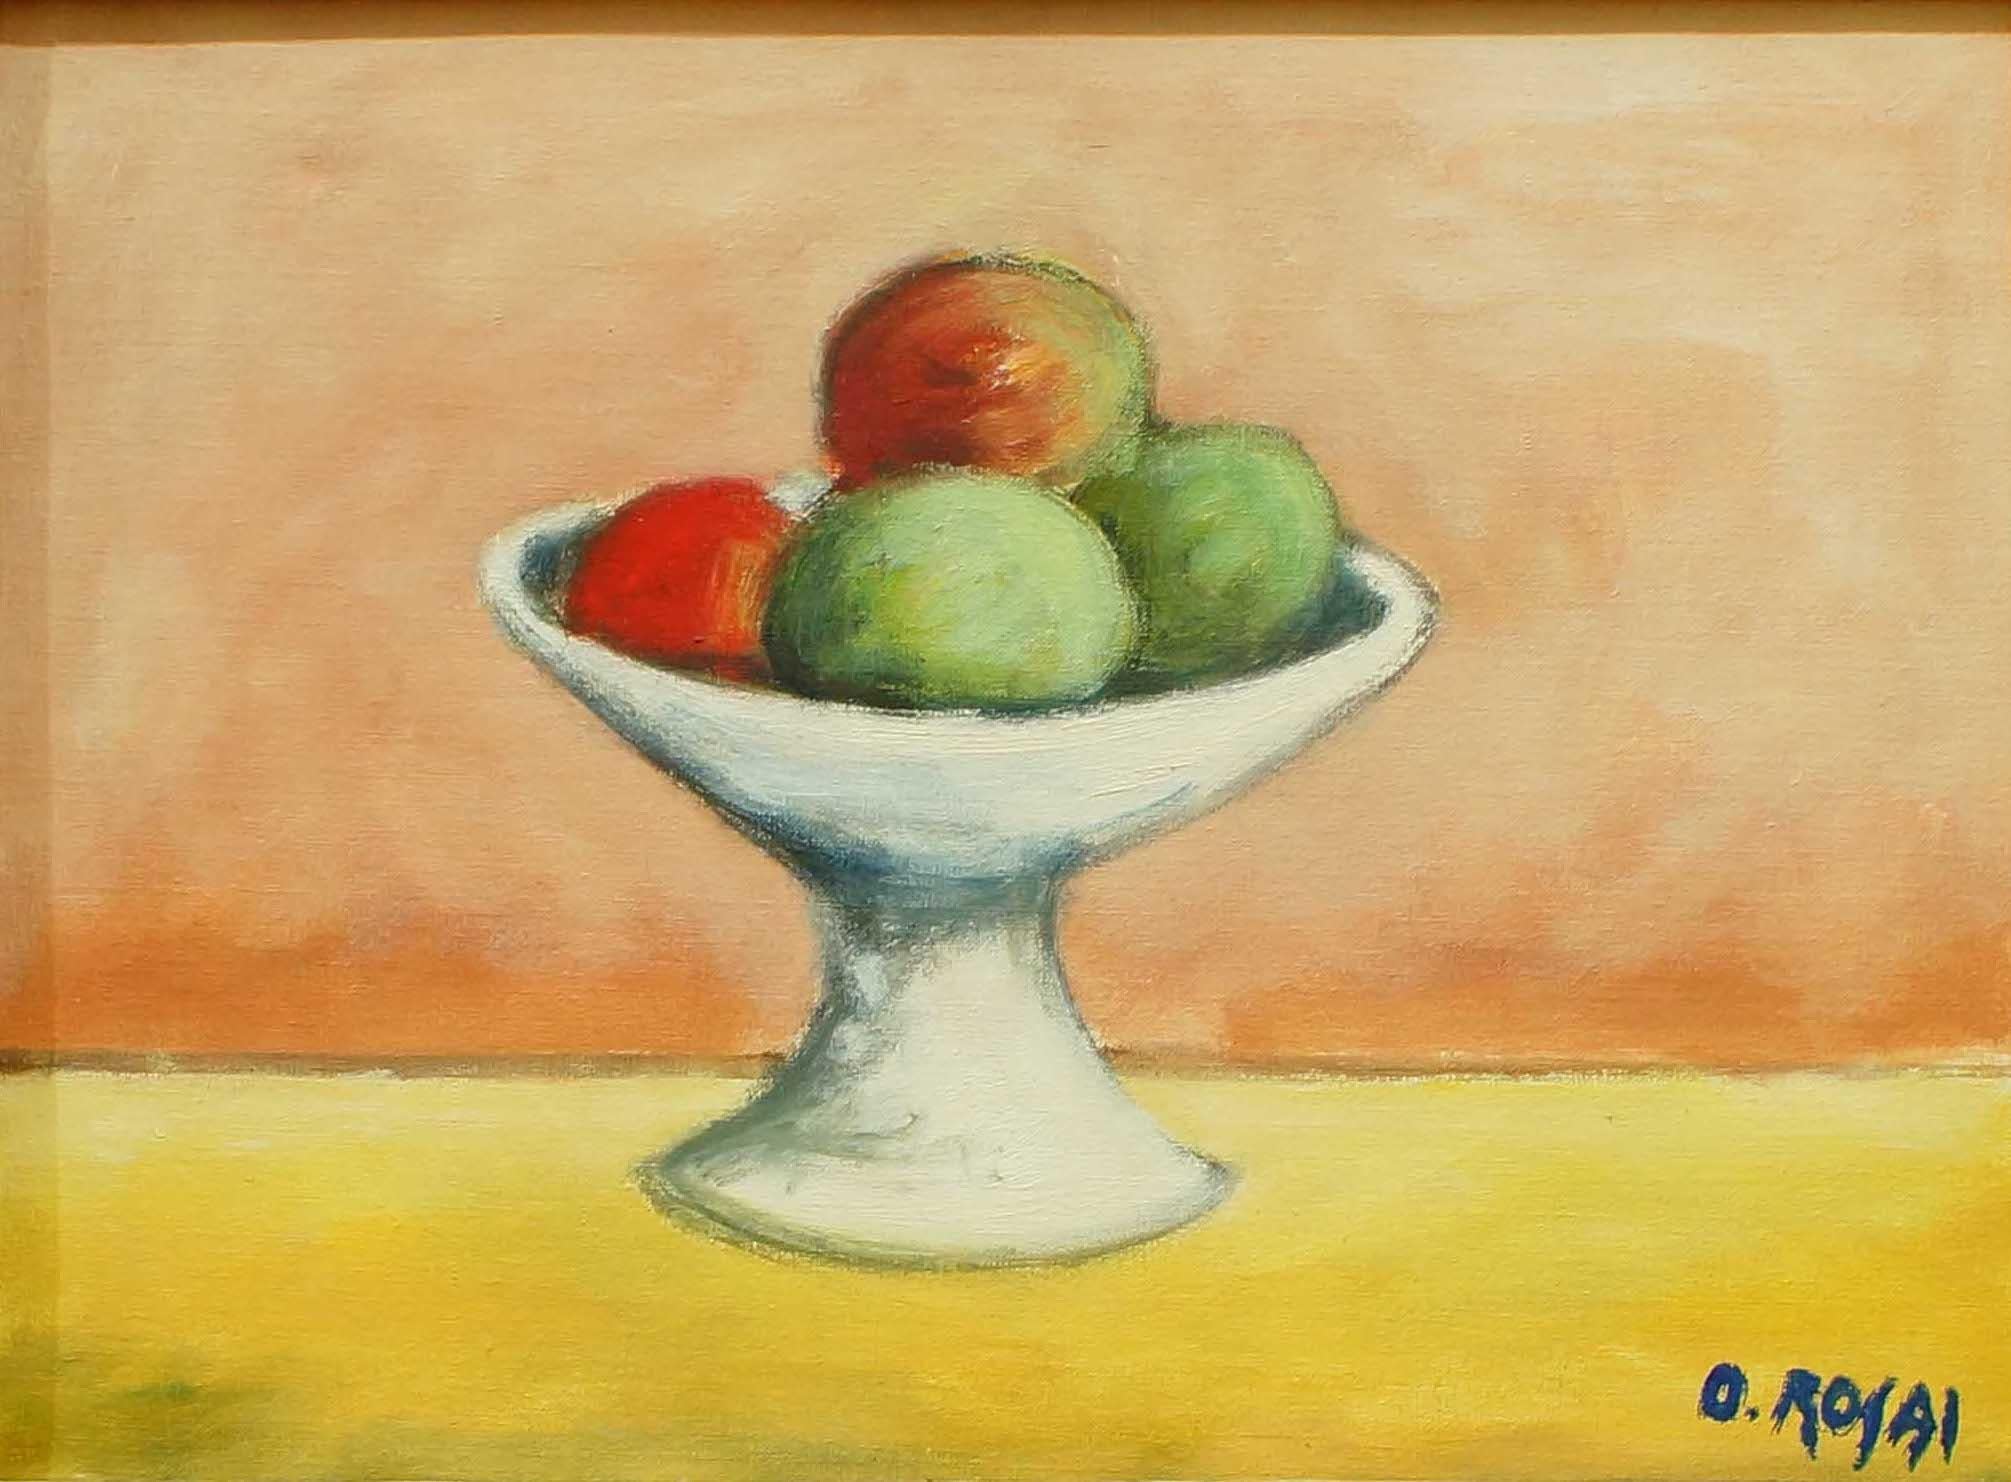 Still Life Painting realized by Ottone Rosai in 1950 ca.
Oil on Canvas, very good conditions includes its coeval wooden frame.
On rear: Label 